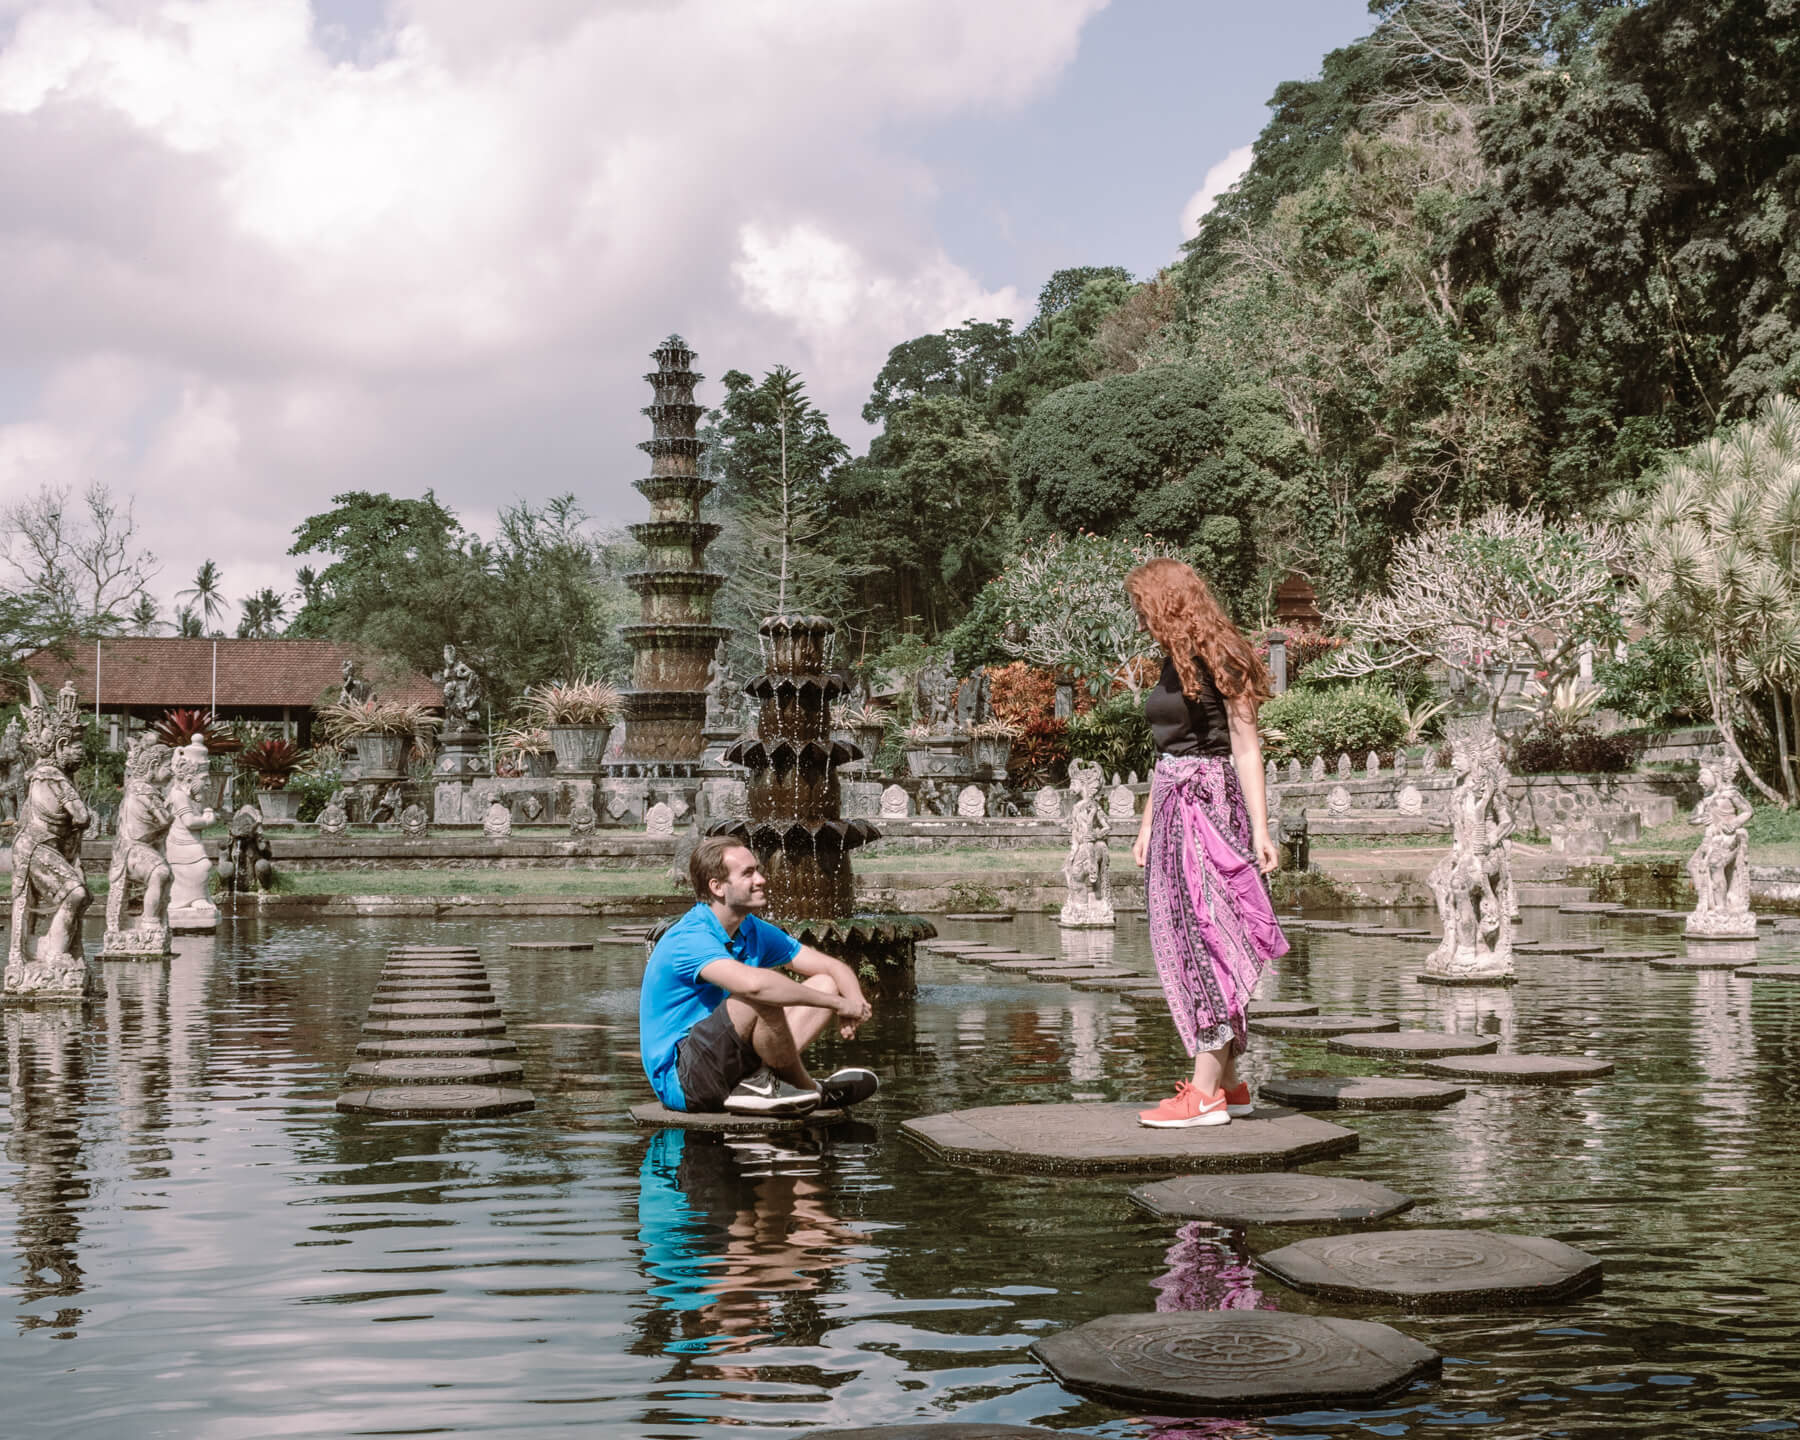 10 Things You Need To Know Before Going To Bali